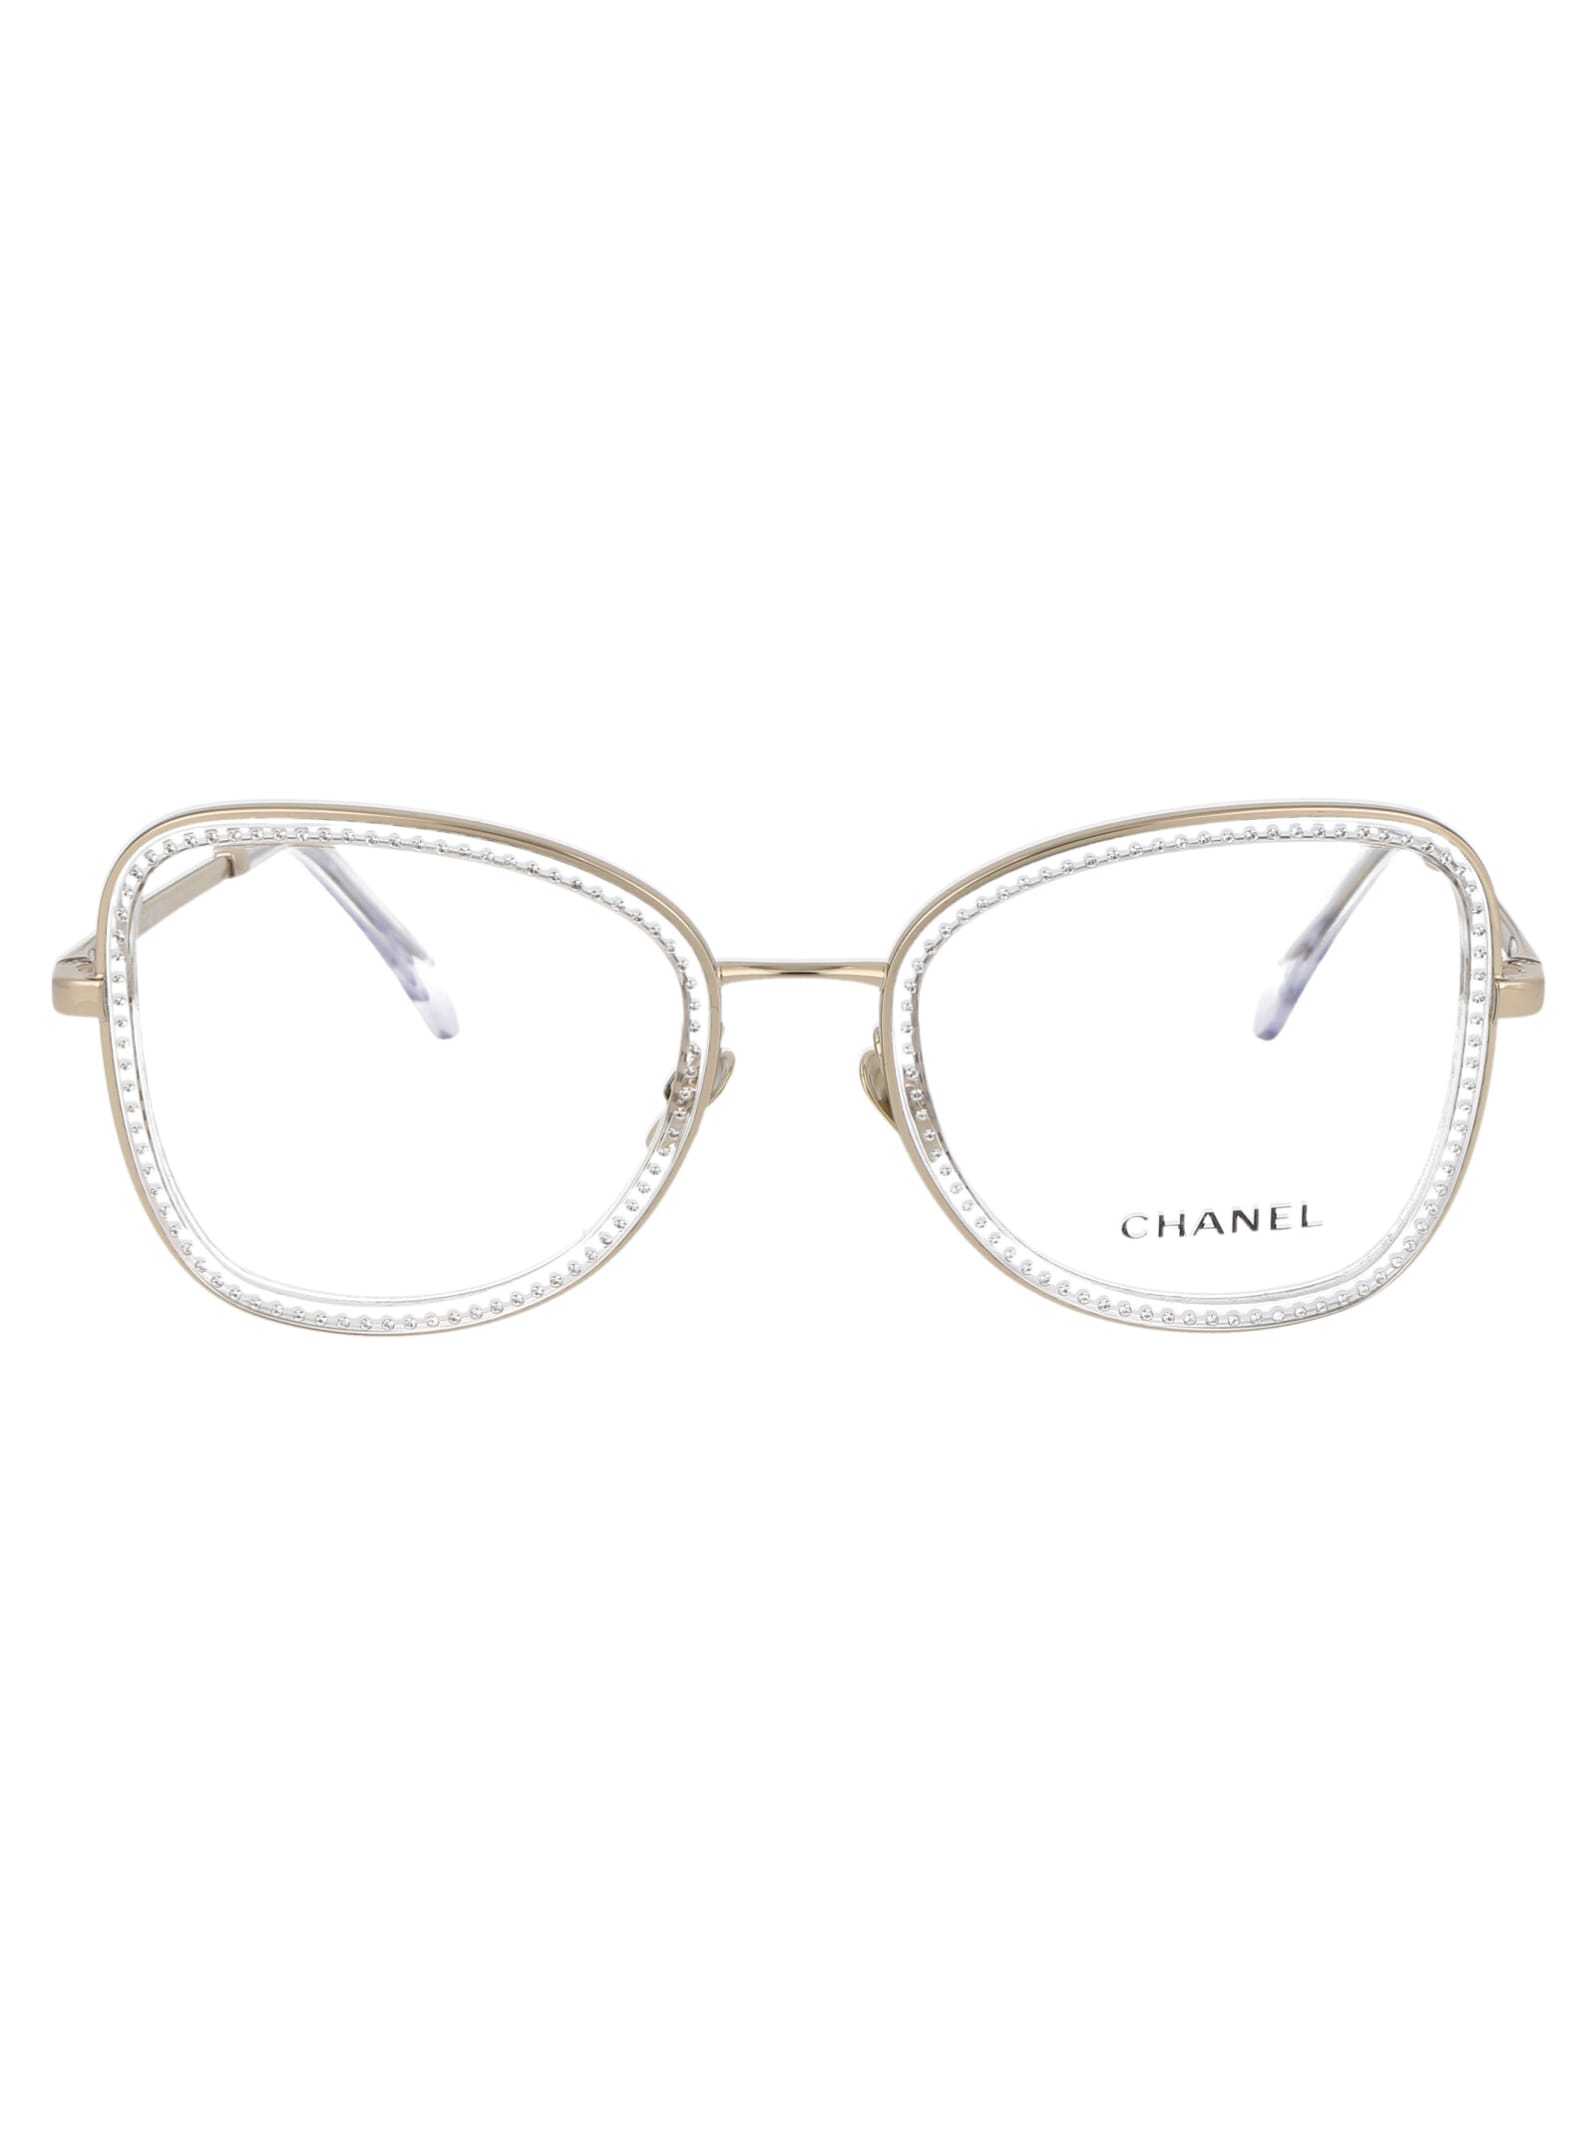 Pre-owned Chanel 0ch2208b Glasses In C269 Pale Gold